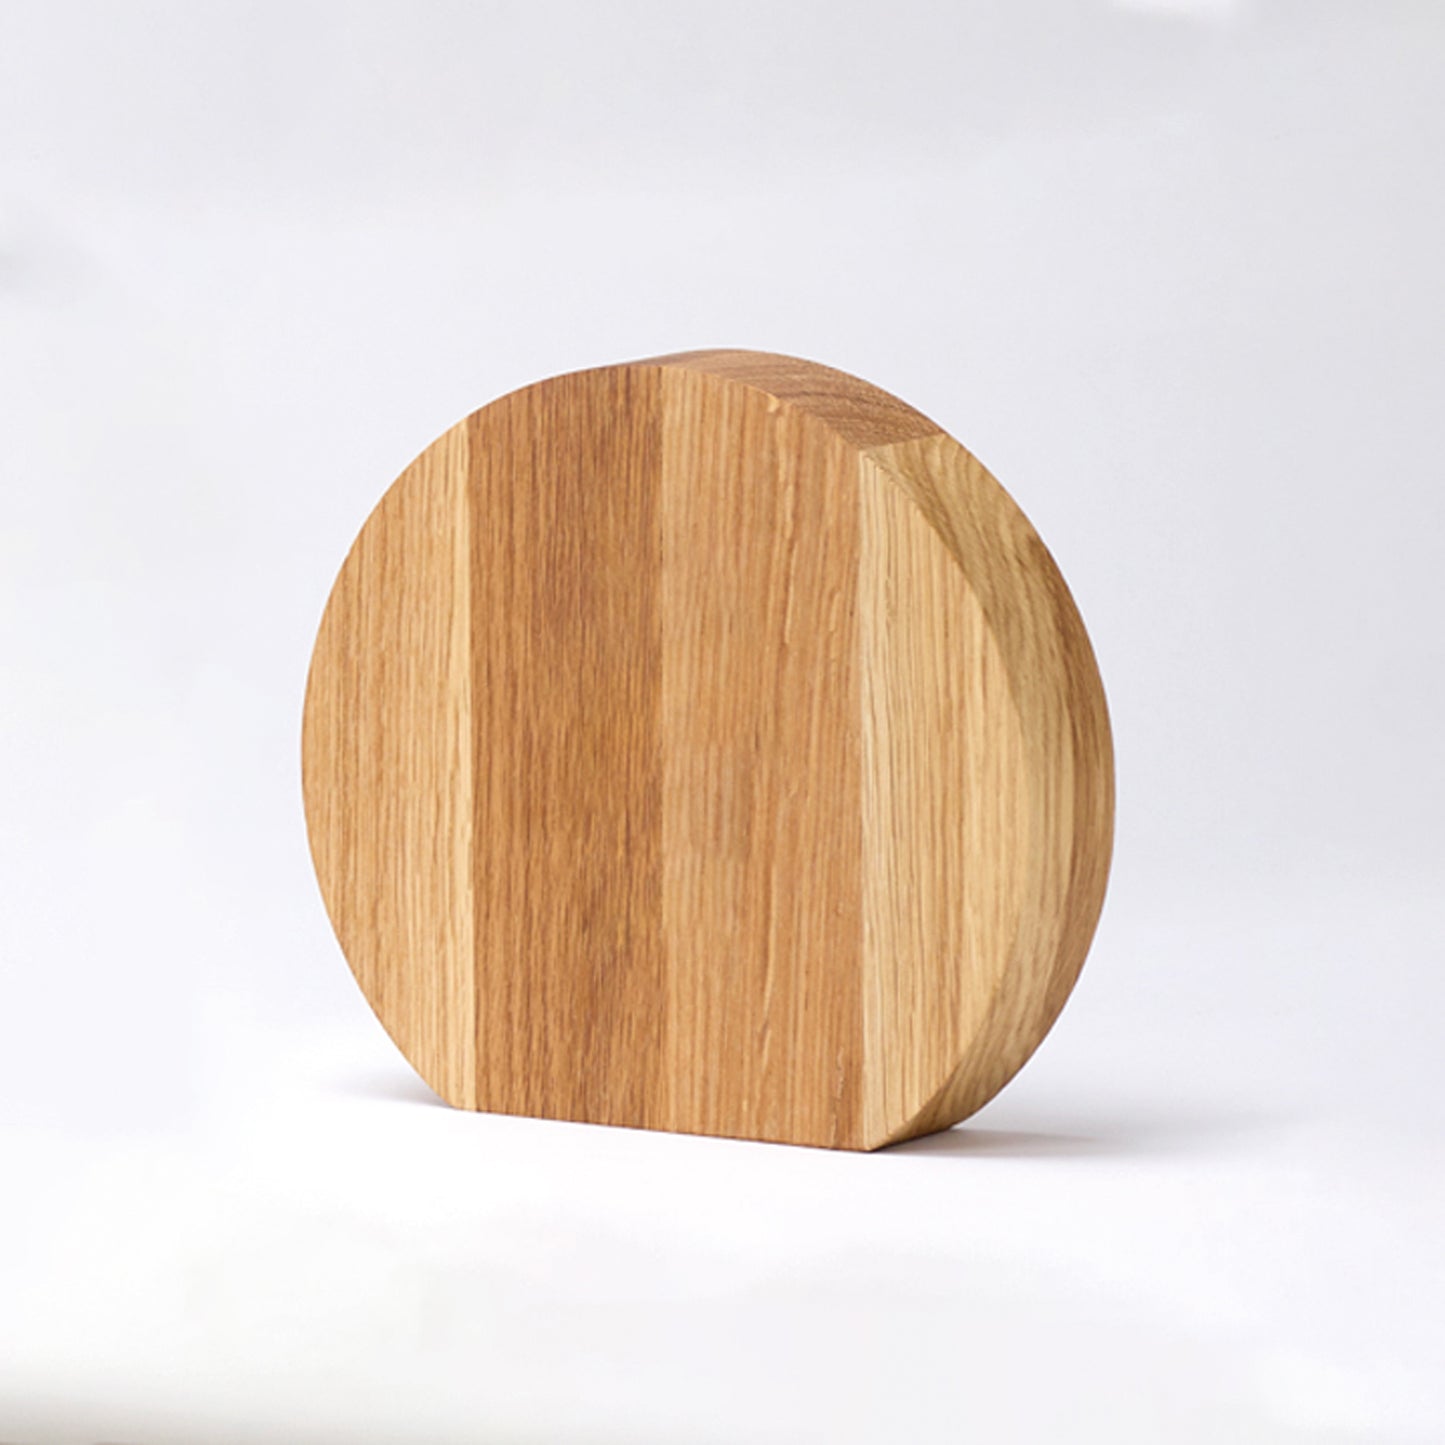 Wooden Beech Oval Trophy - Available in 3 Sizes